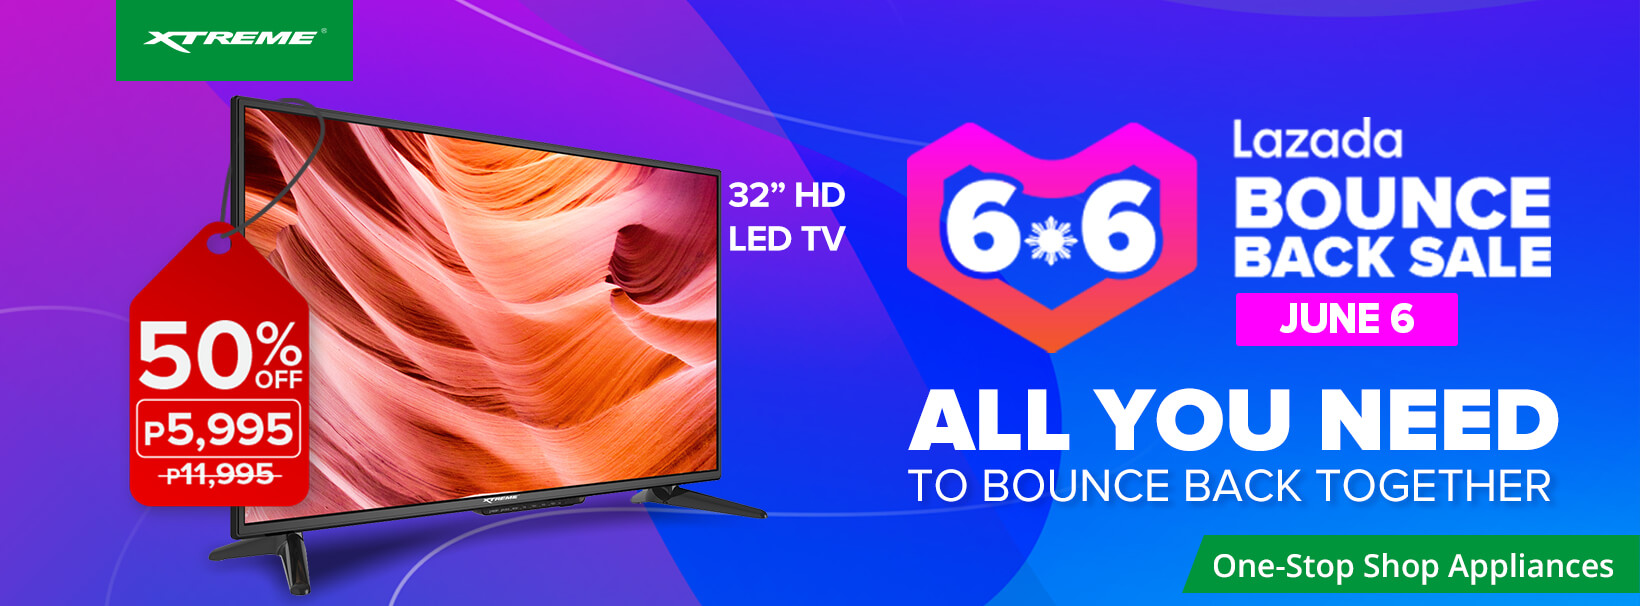 Get 50% Off a 32″ XTREME LED TV at Lazada’s 6.6 Bounce Back Sale!